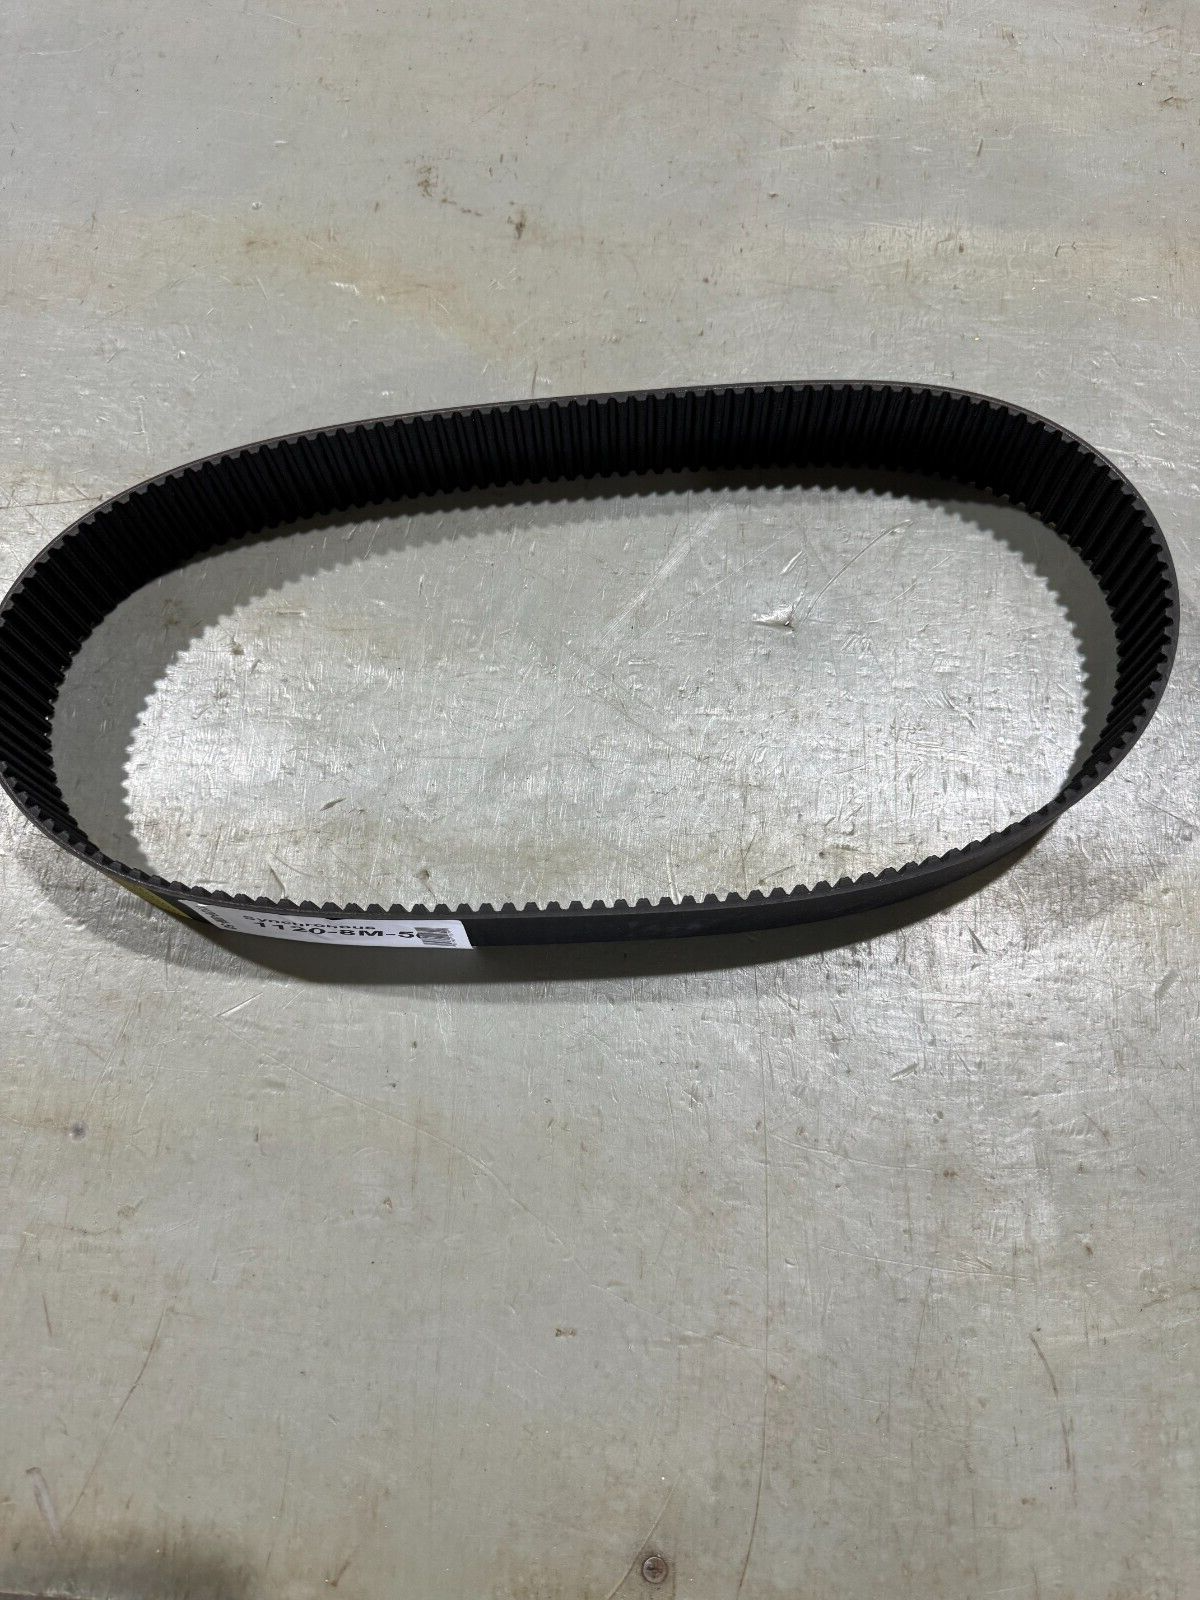 FACTORY NEW GOODYEAR SYNCHRONOUS Sync RPP TIMING BELT 1120-8M-50